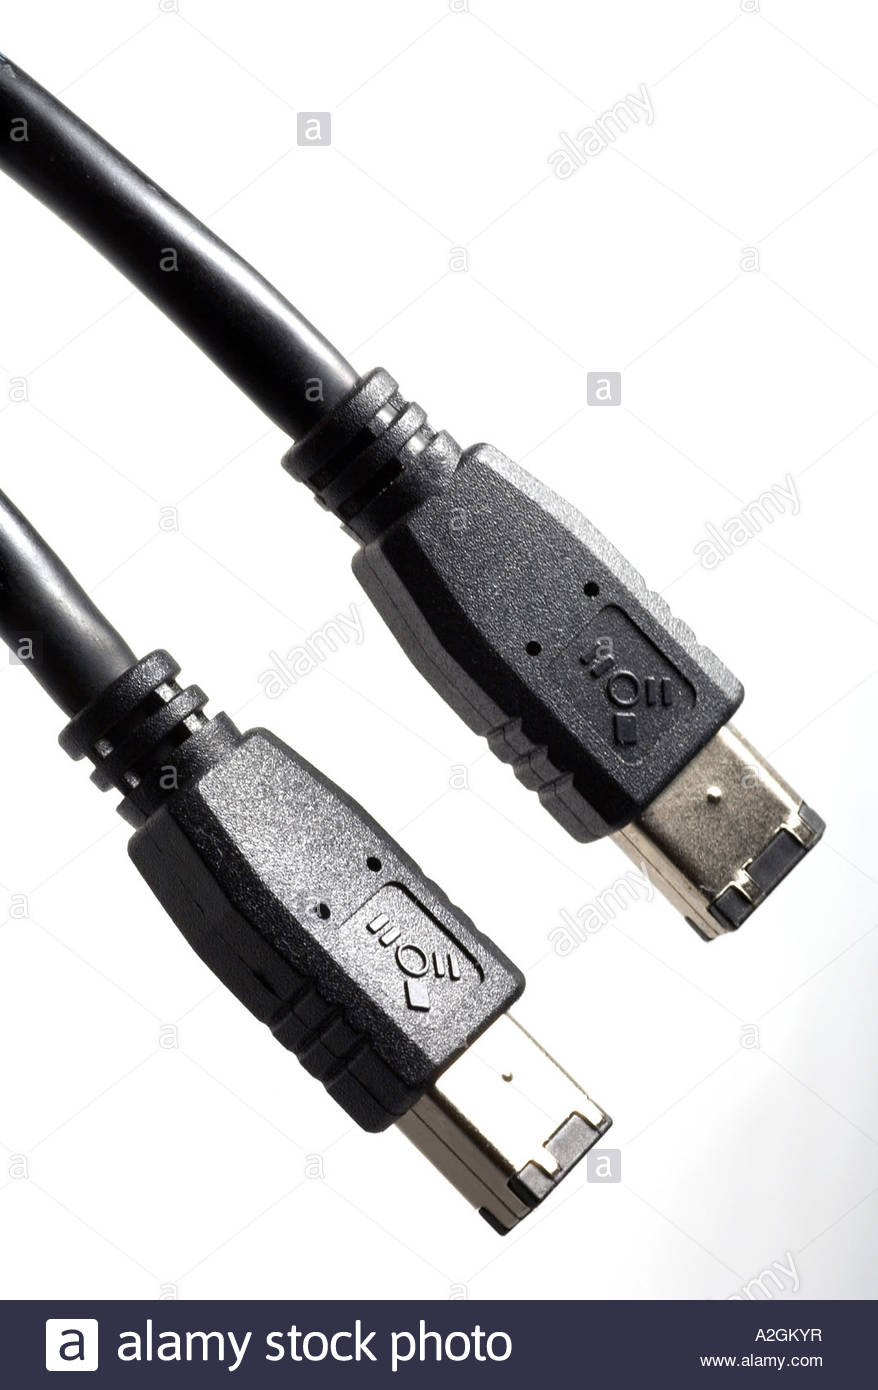 Firewire cable and connector plugs Stock Photo